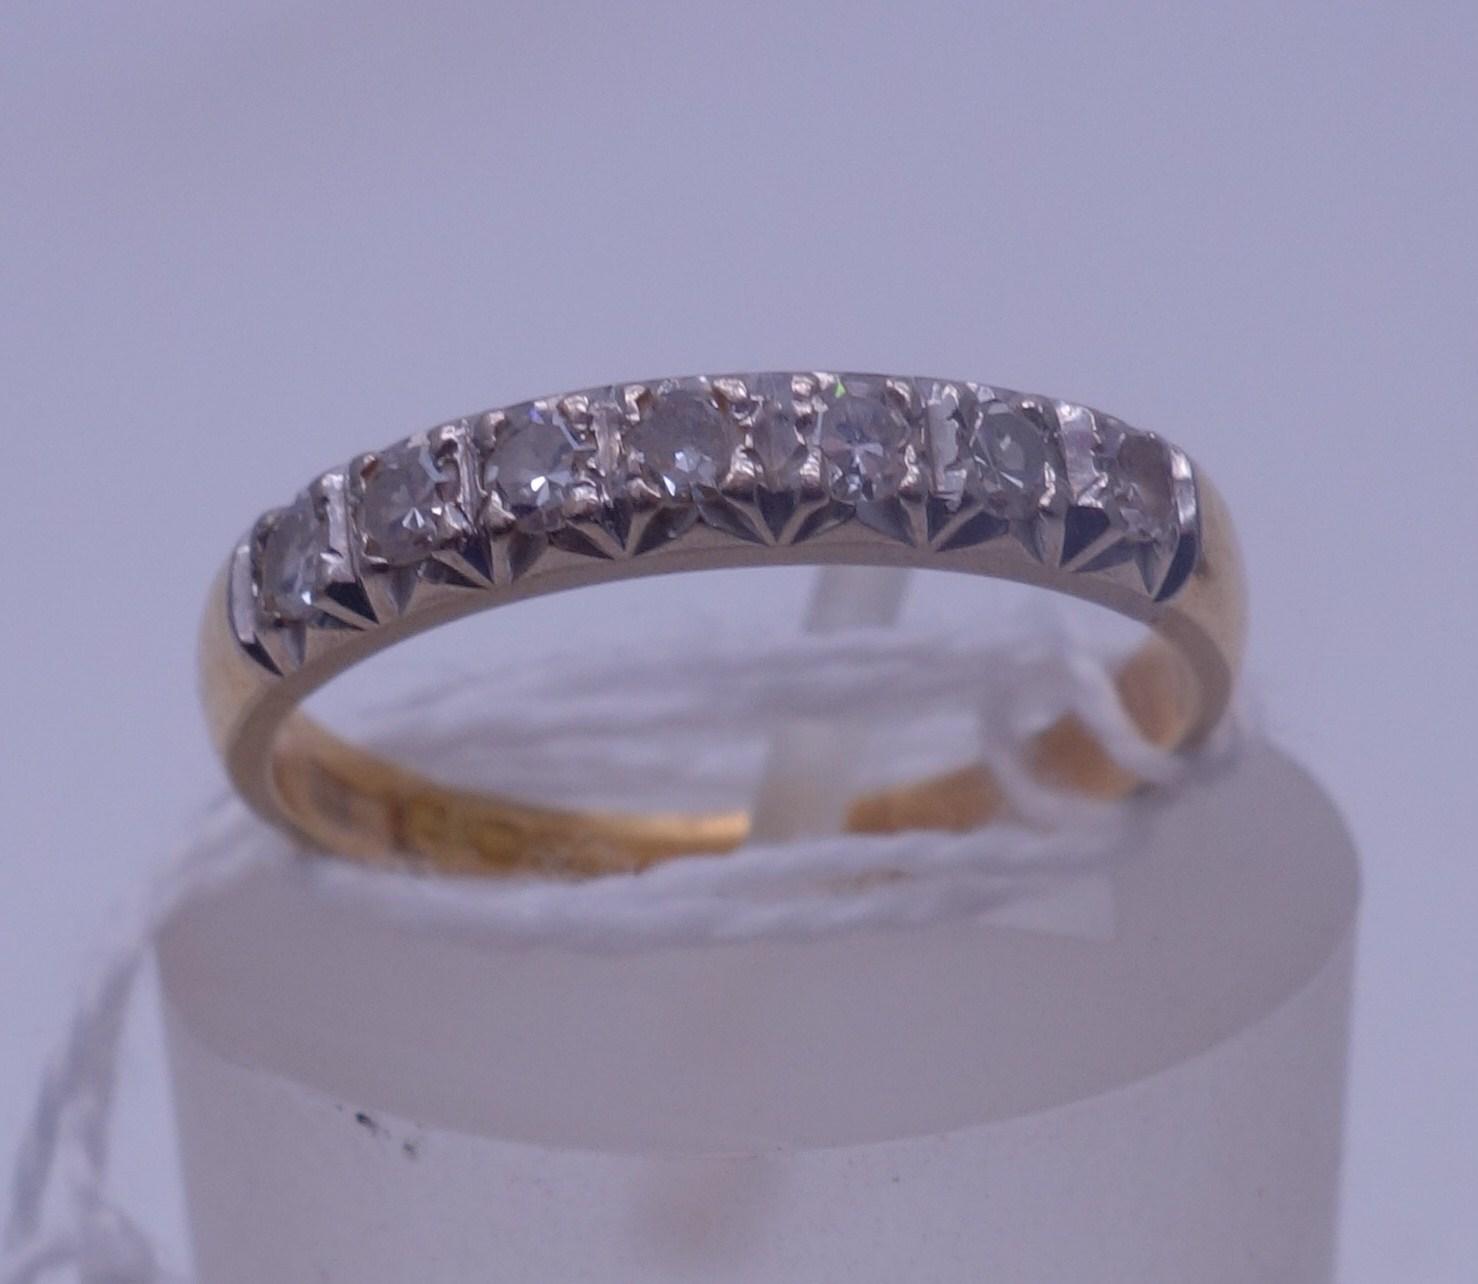 18ct gold half hoop diamond ring size K the top set with 7 small diamonds, Sheffield h/m c1950's 2.4